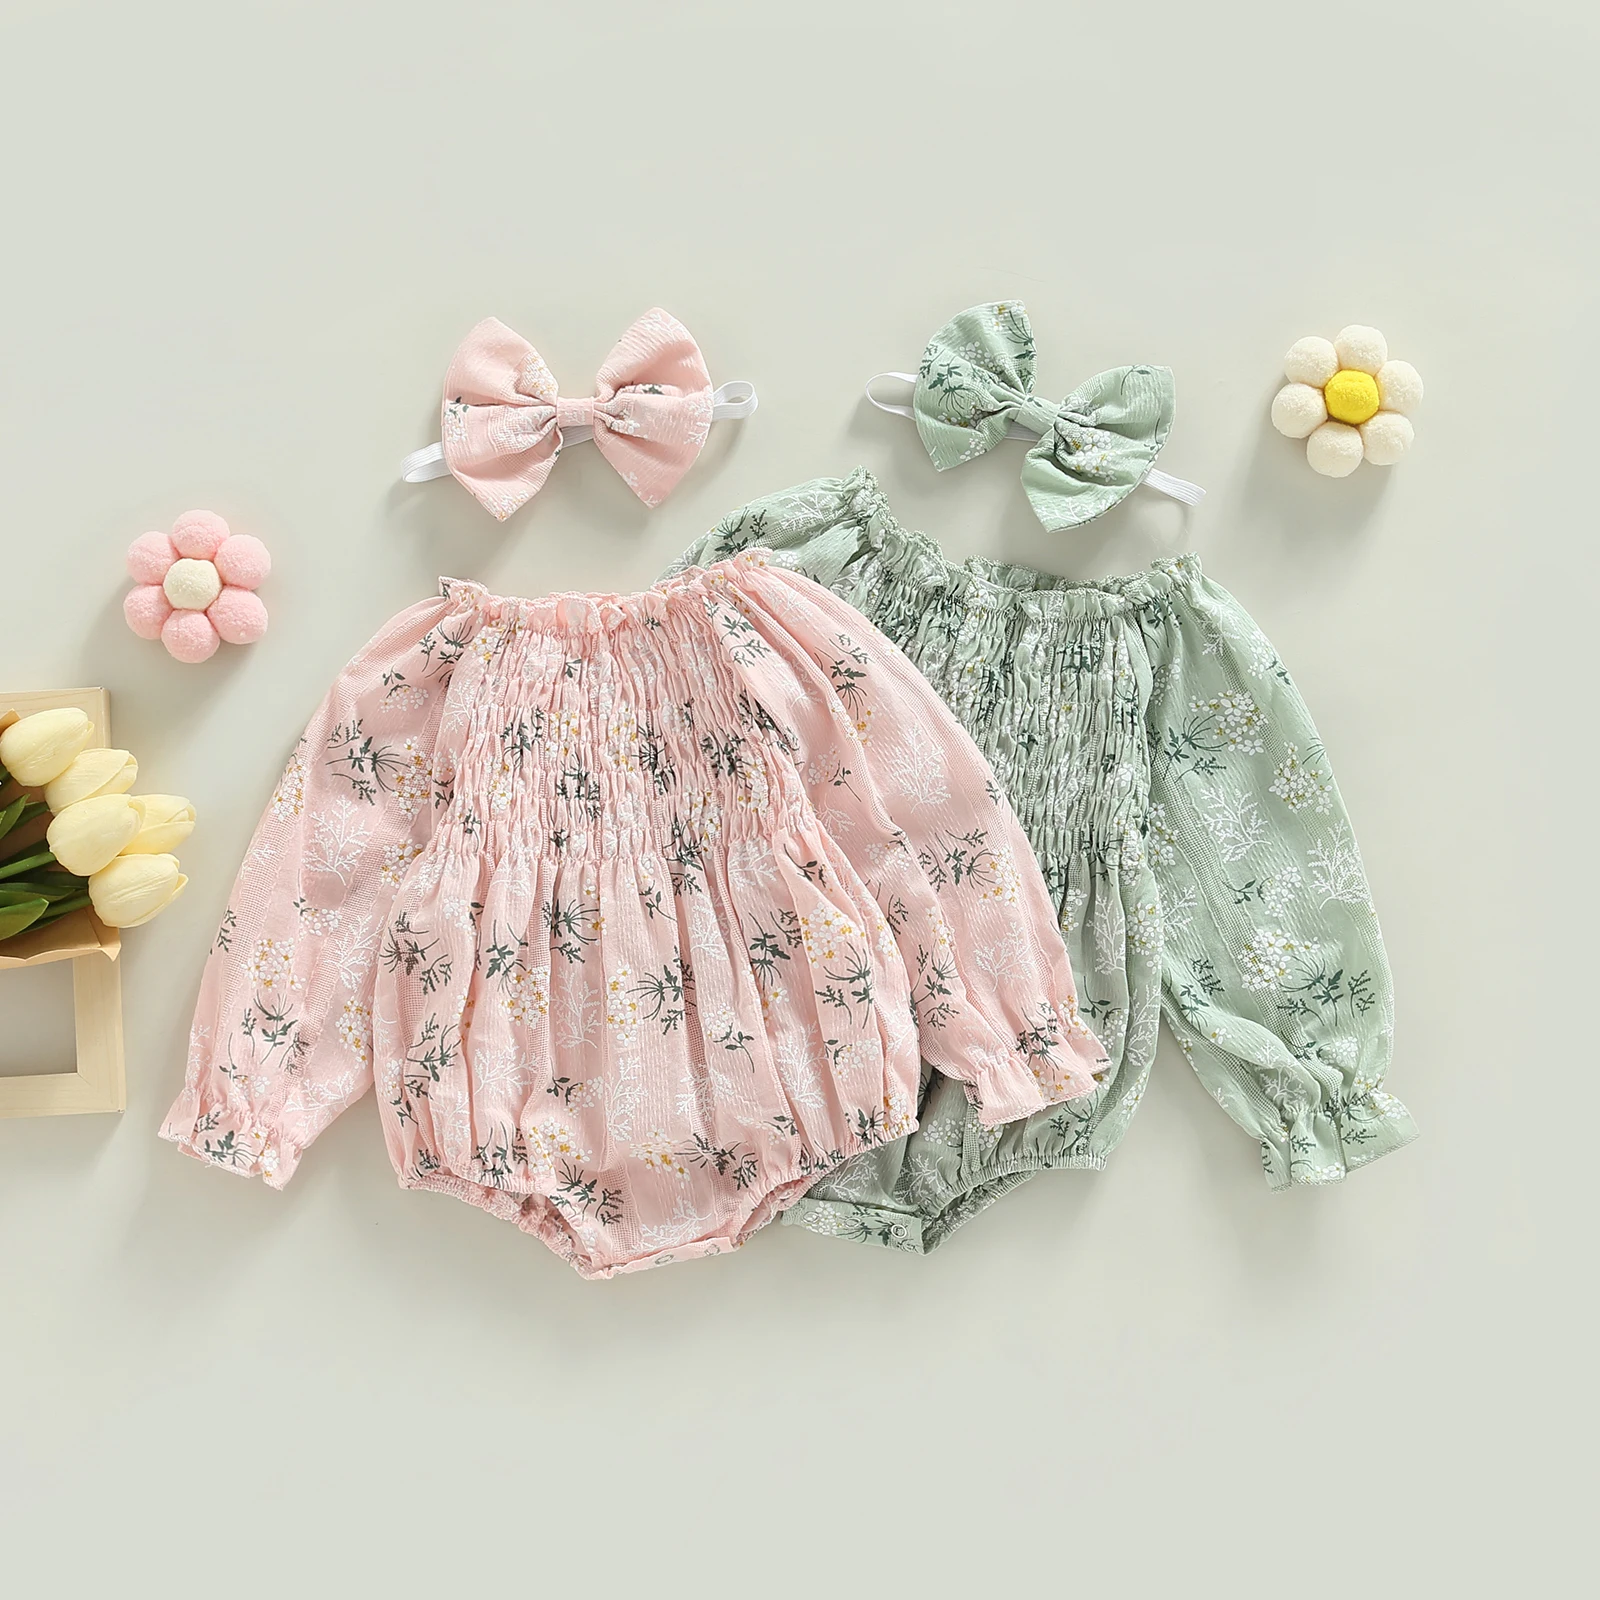 

SUNSIOM Newborn Baby Girls Clothes Romper Set Long Sleeve Off-shoulder Pleated Flower Print Romper with Hairband 2pcs